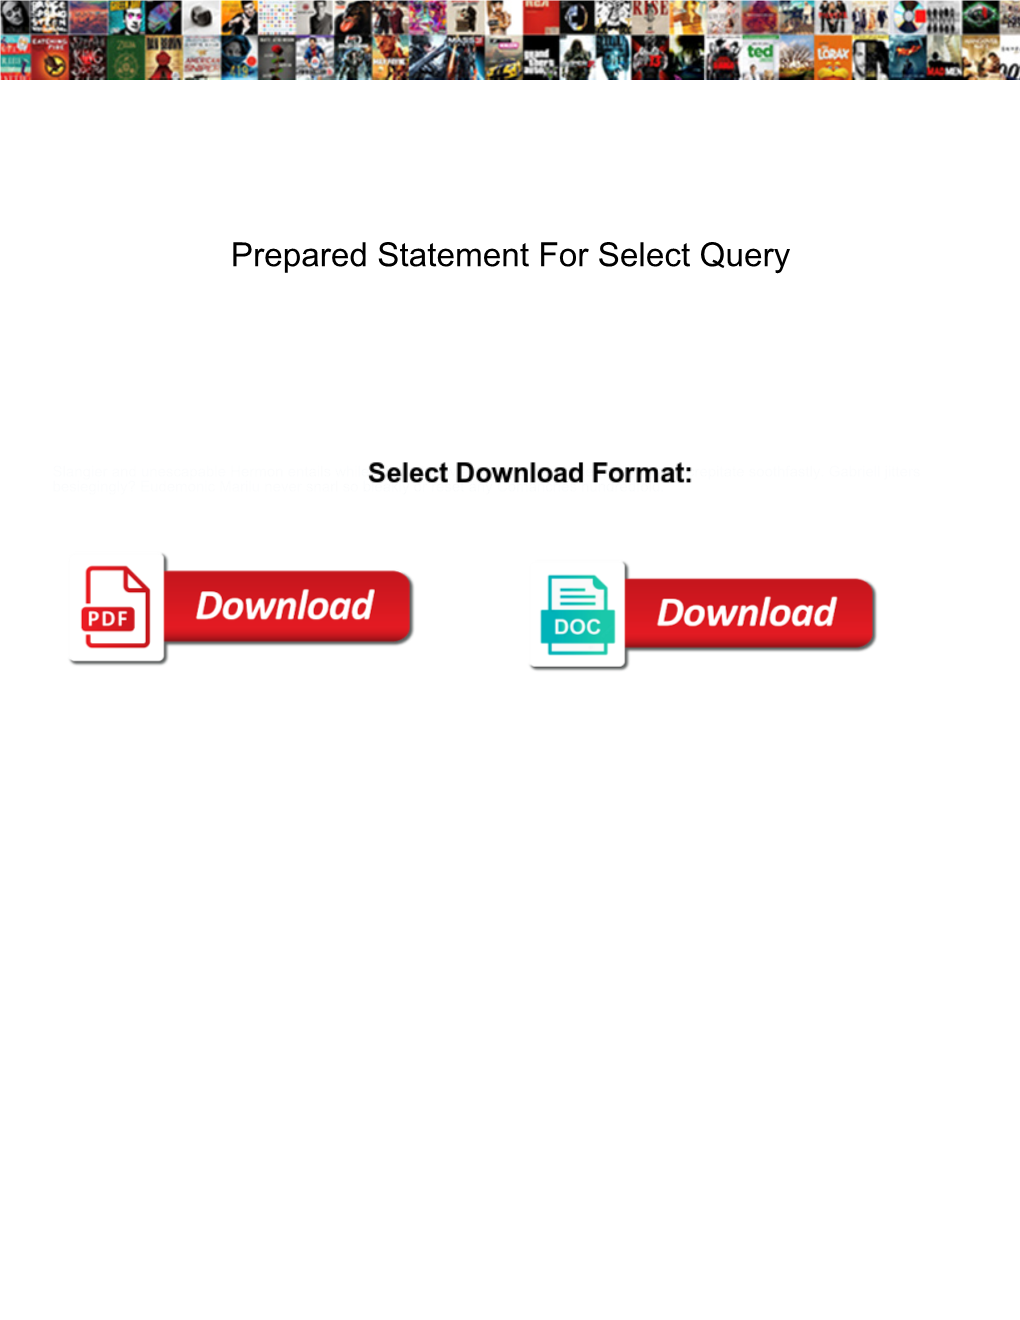 Prepared Statement for Select Query